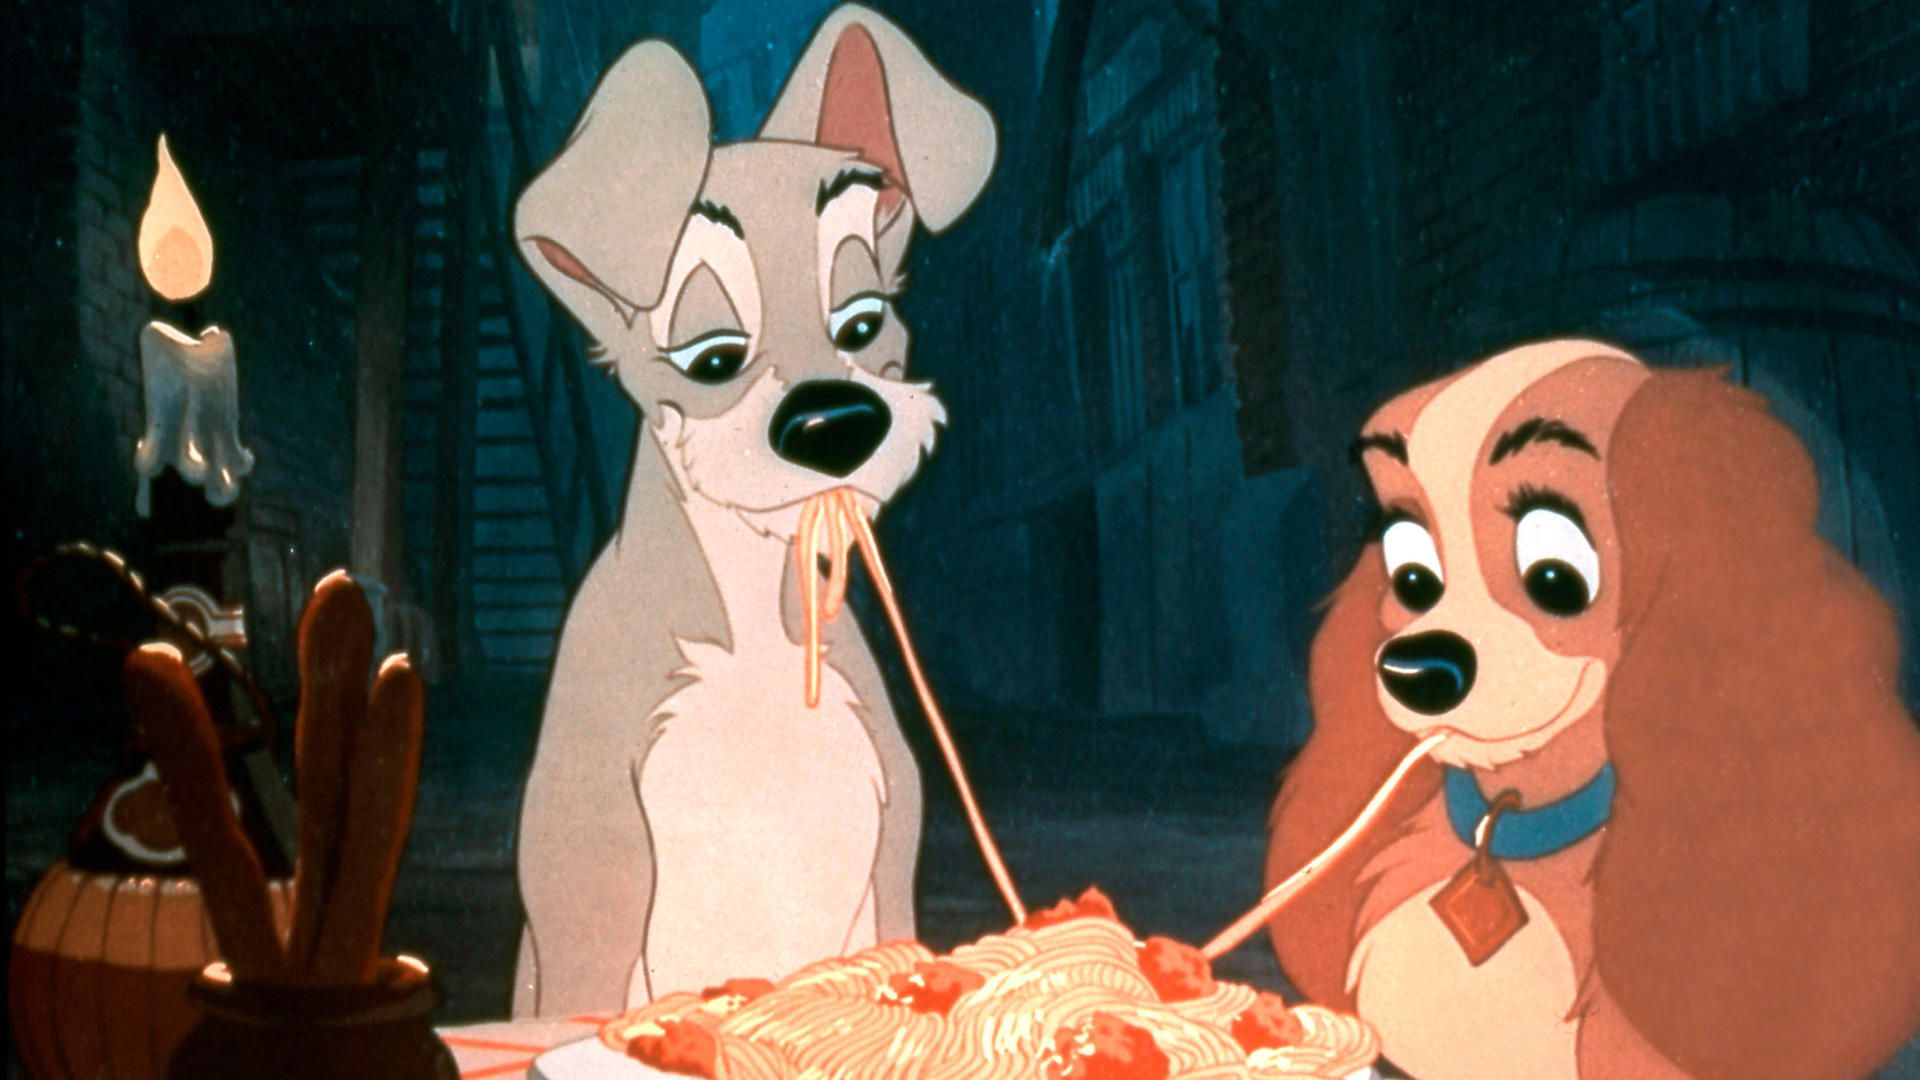 <p>                     The iconic scene of the two dogs slurping the same string of spaghetti has become a symbol of romance worldwide. An adorable tale of a mongrel dog, Tramp, finding the beautiful Cocker Spaniel Lady, whose home life is in disarray. Emotional, compassionate and a beautiful love story.                   </p>